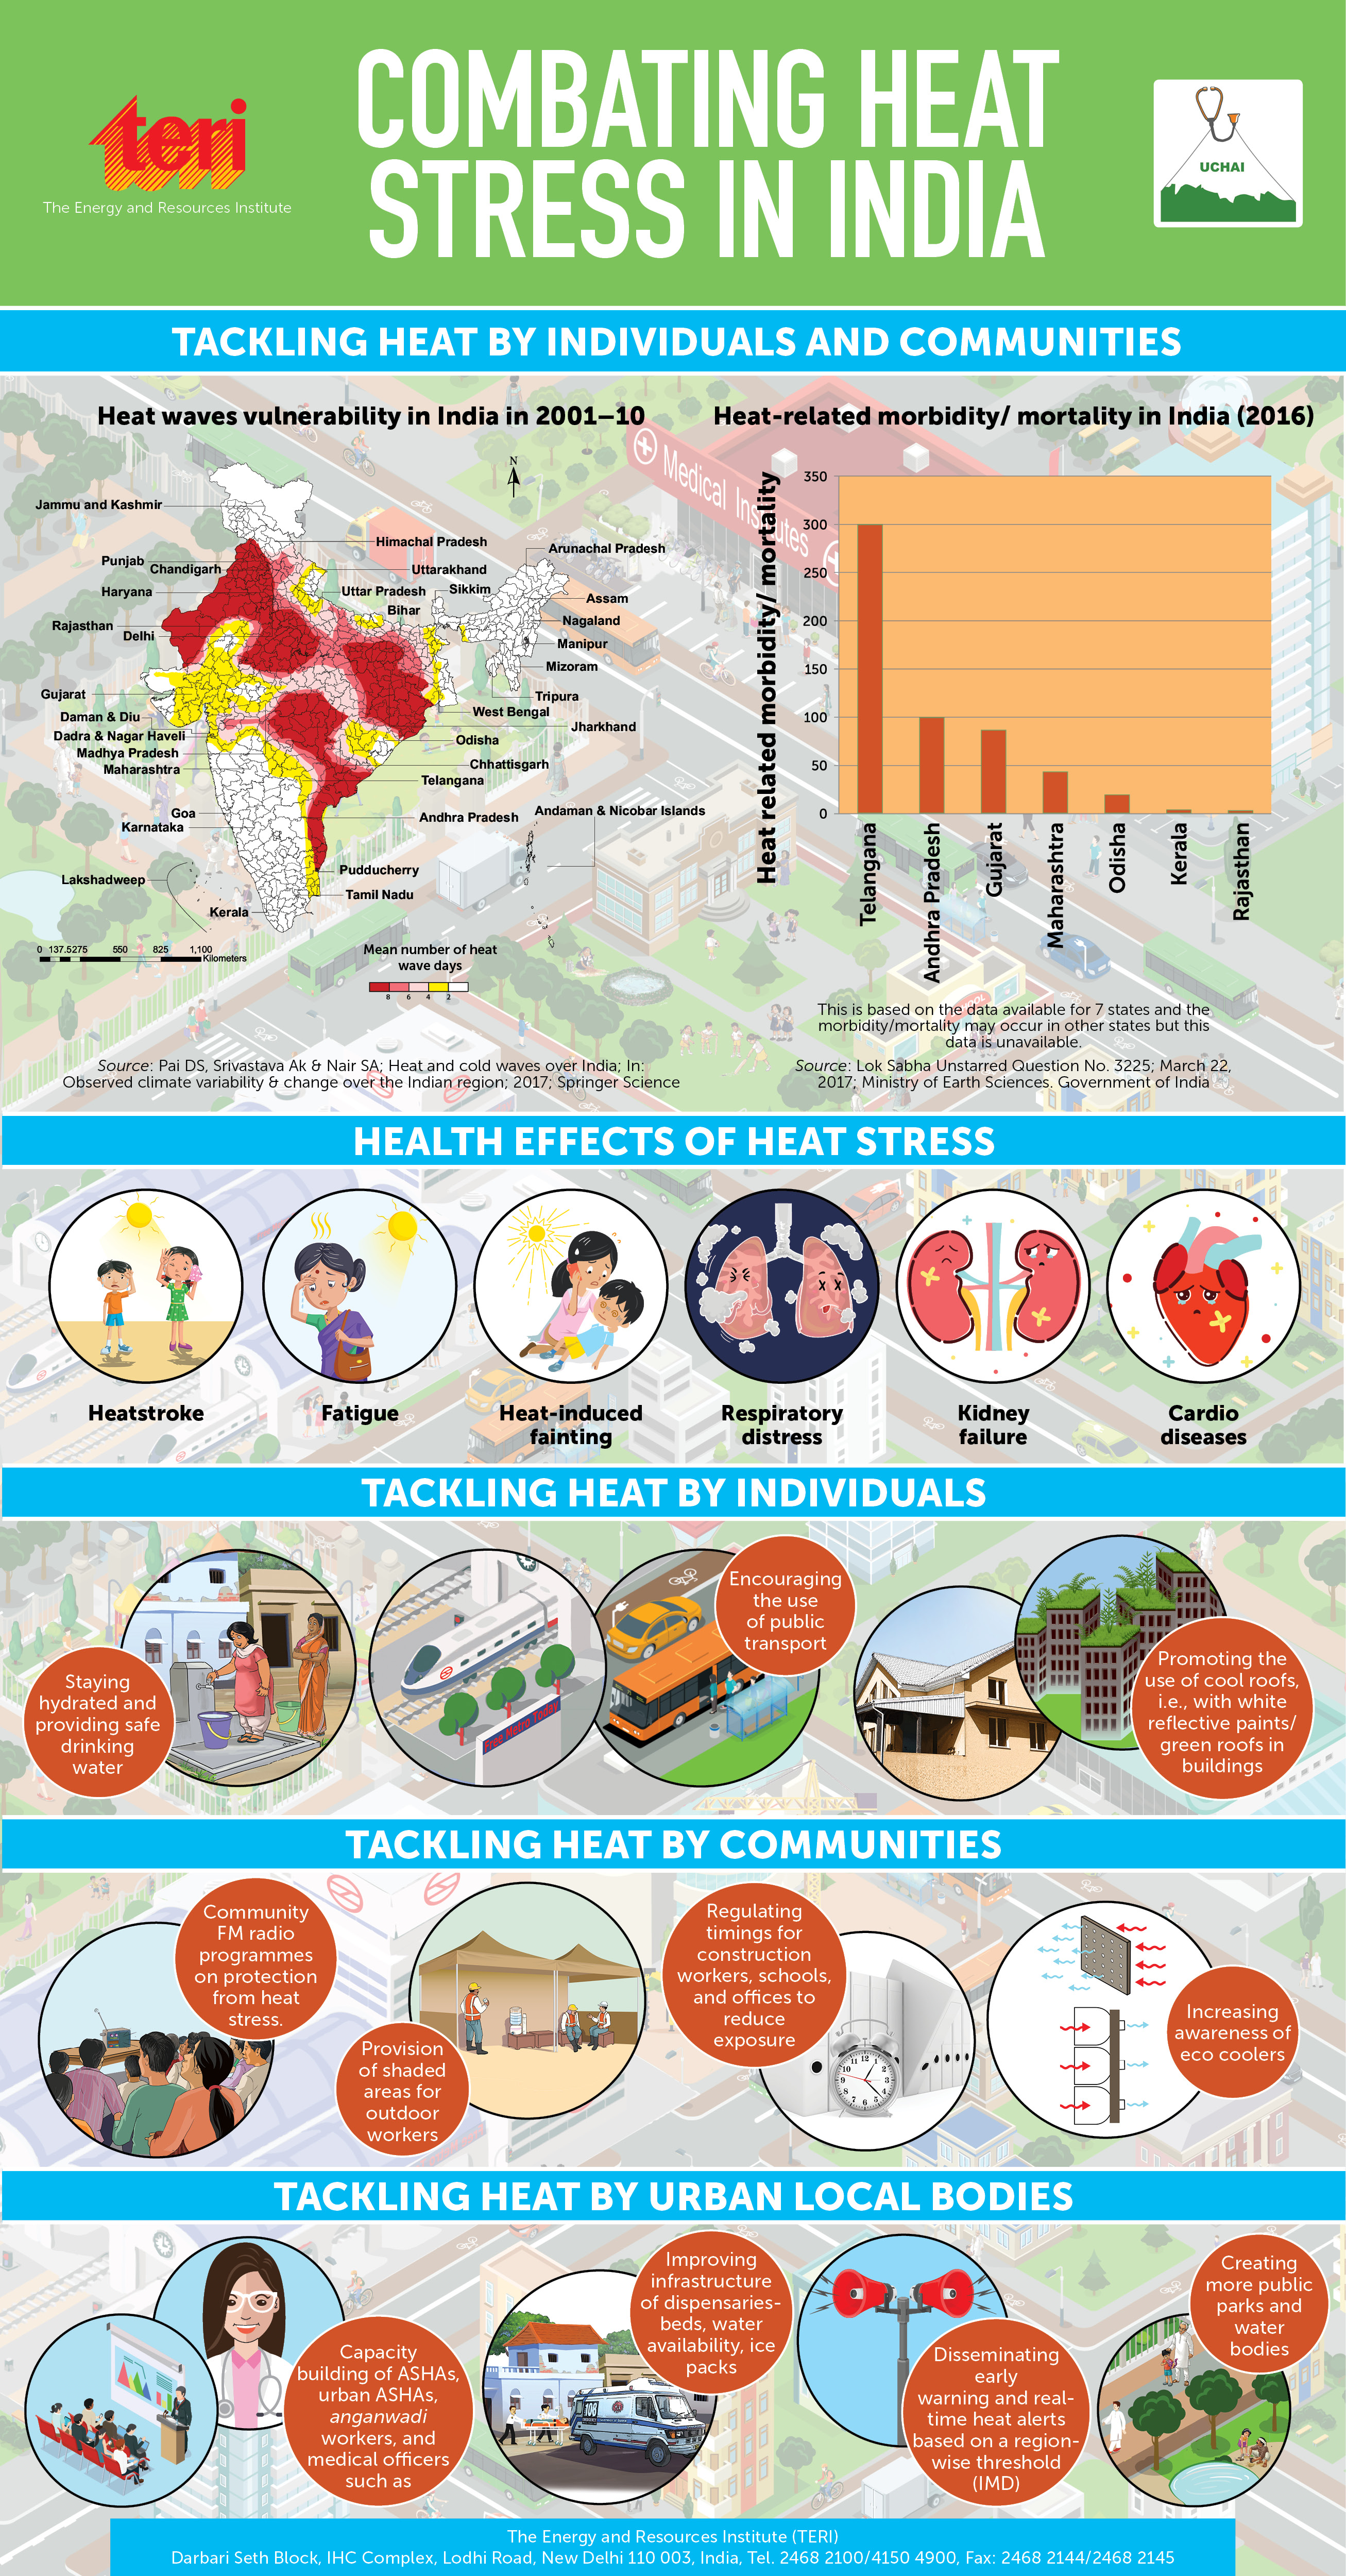 Understanding the health impacts of heat stress in India